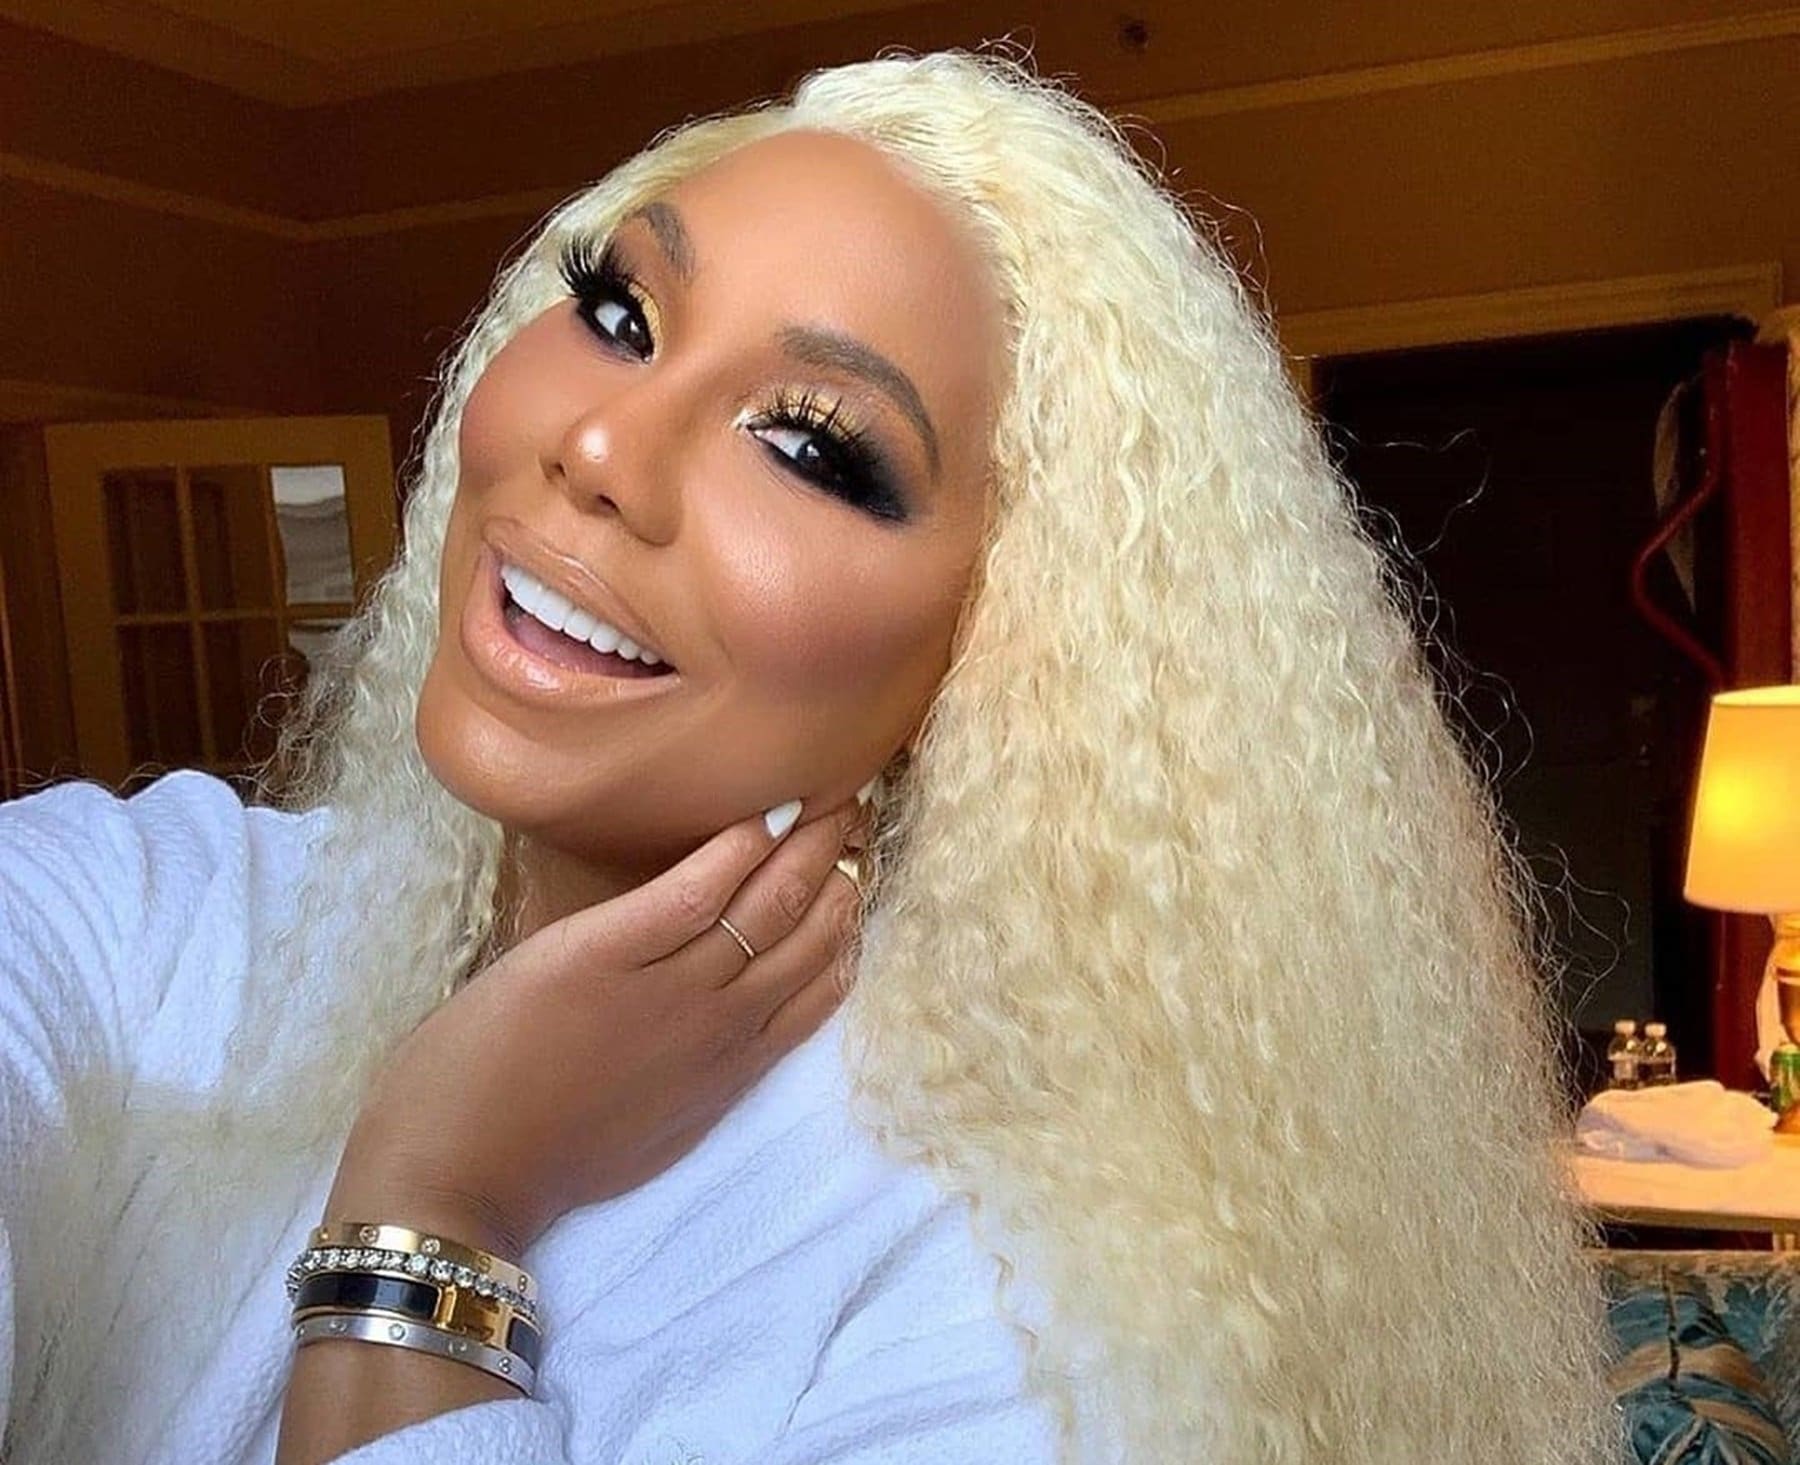 ”tamar-braxton-enters-the-new-year-with-sultry-pink-bathing-suit-in-latest-video-as-bf-david-adefeso-gets-ready-to-rock-her-world”